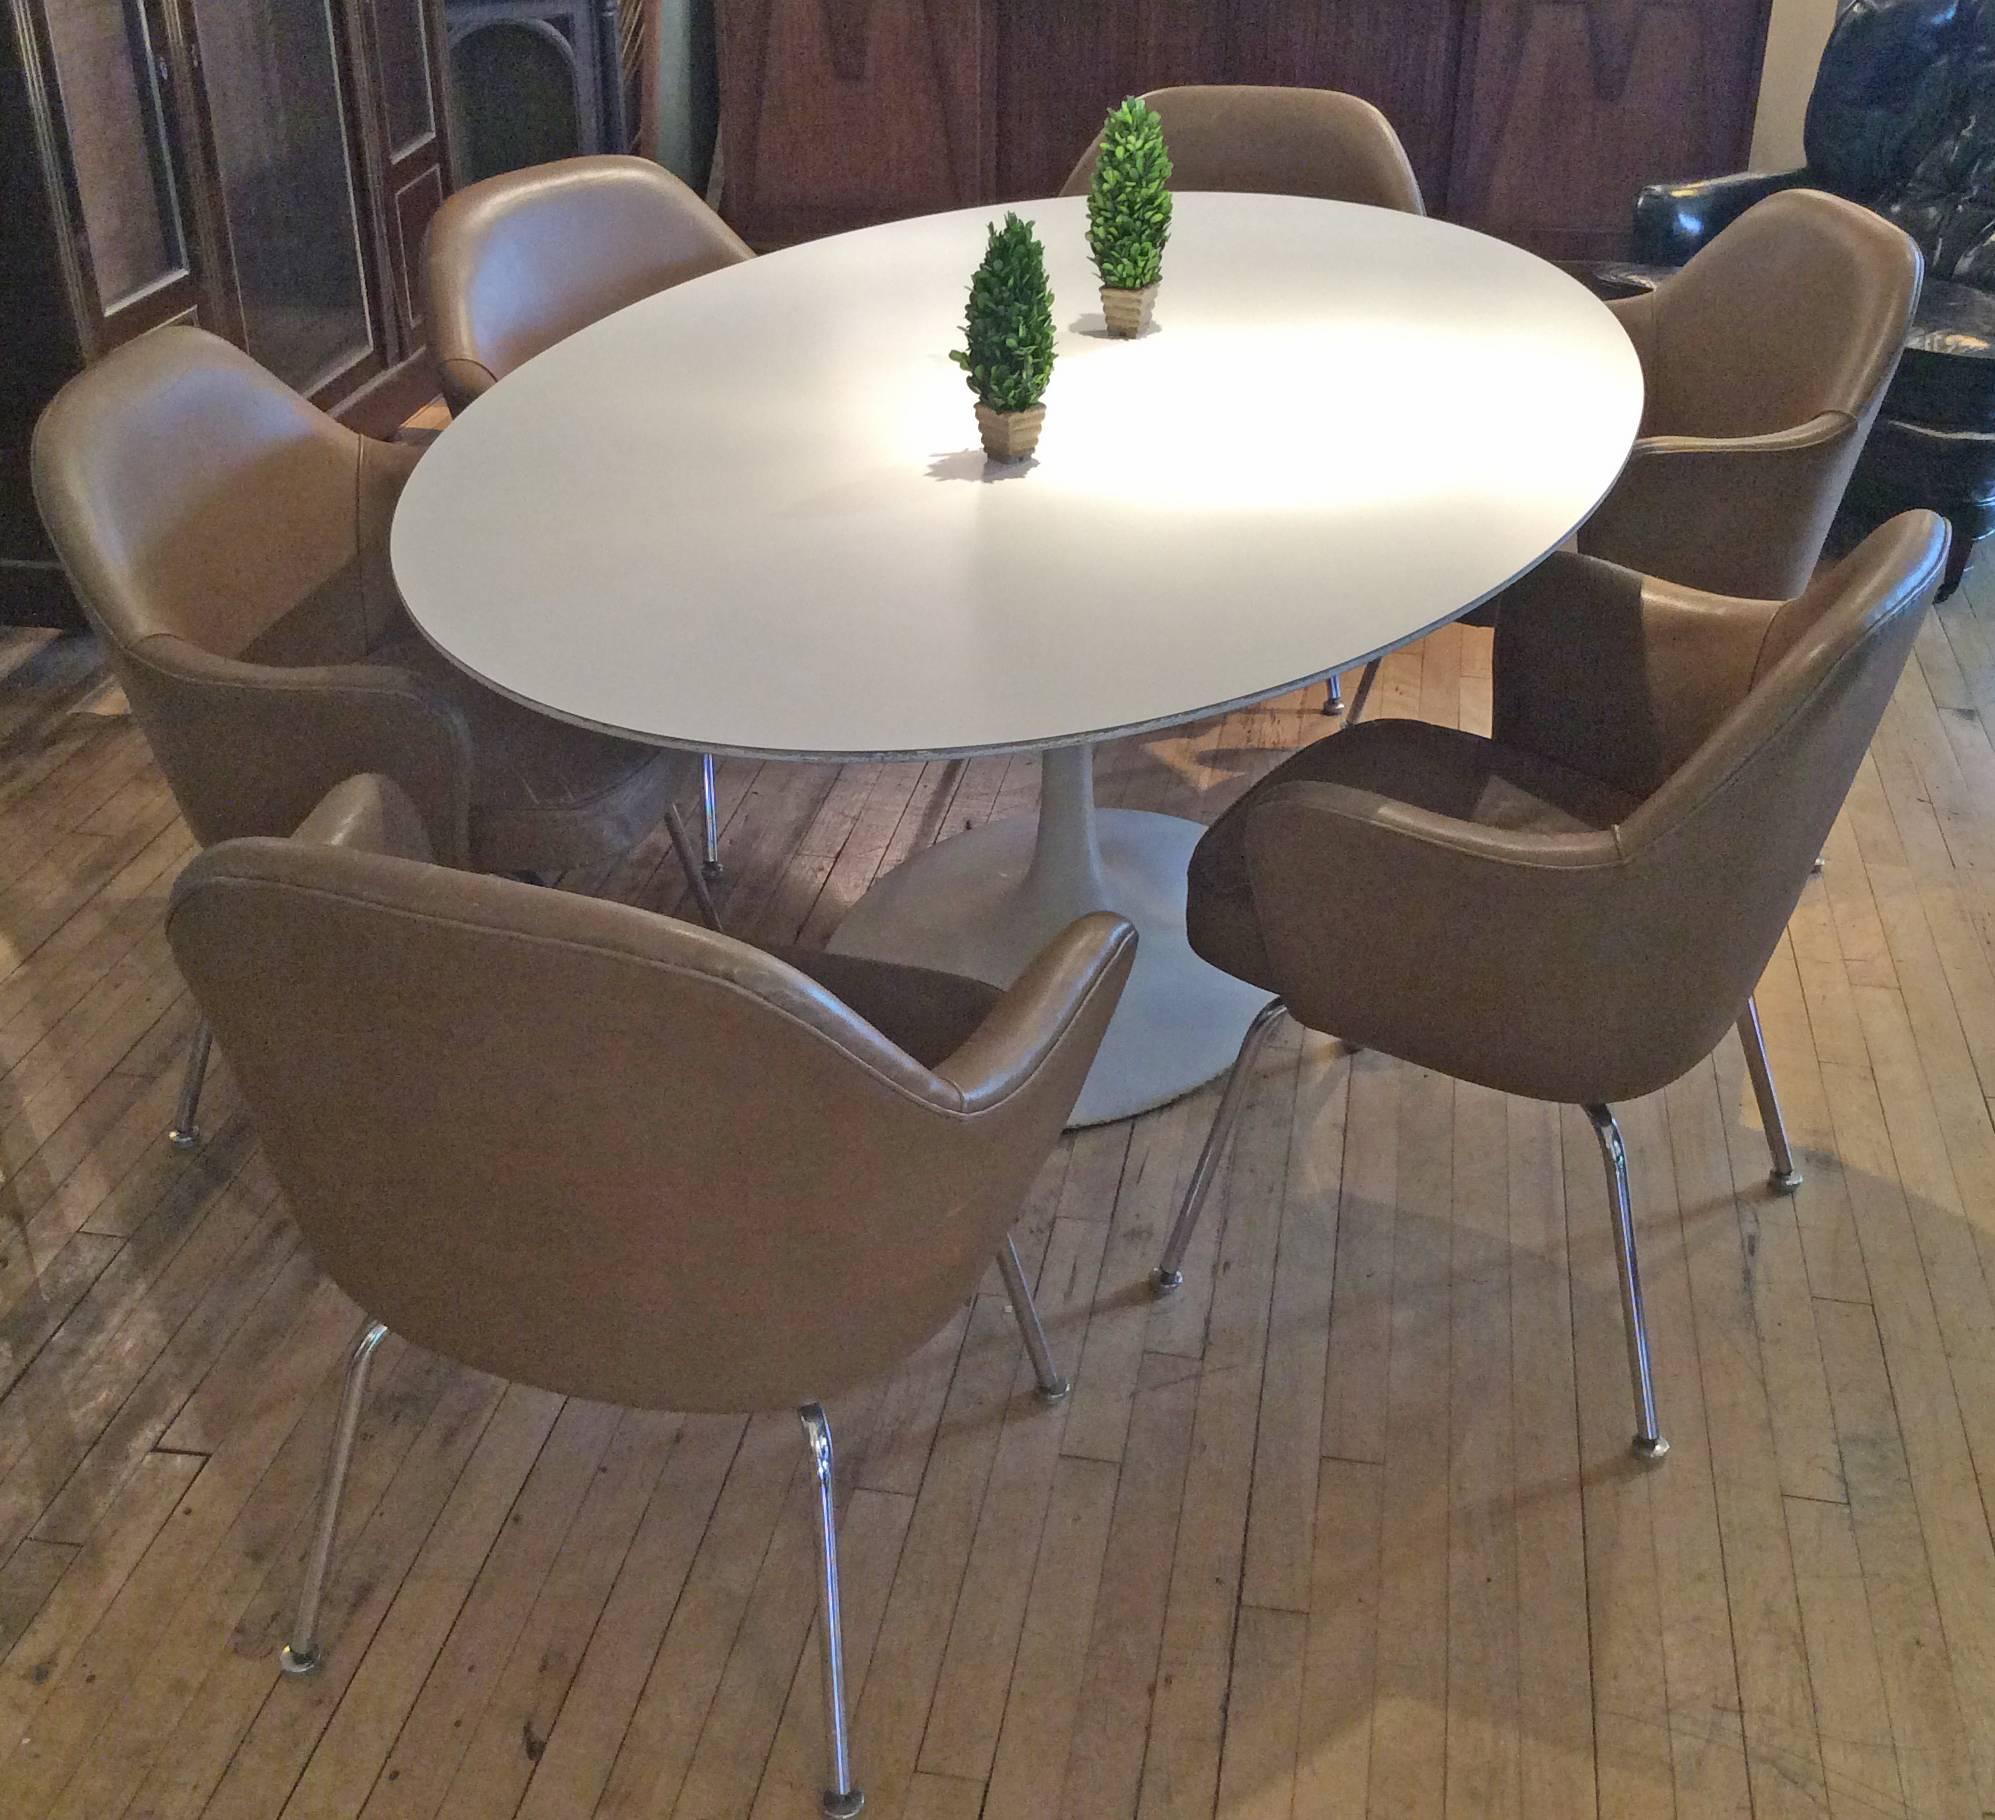 A very nice and Classic vintage oval dining table designed by Saarinen for Knoll, with cast iron base and white laminate top. In good original condition with wear as expected around the edge of the table, and the original Knoll label.